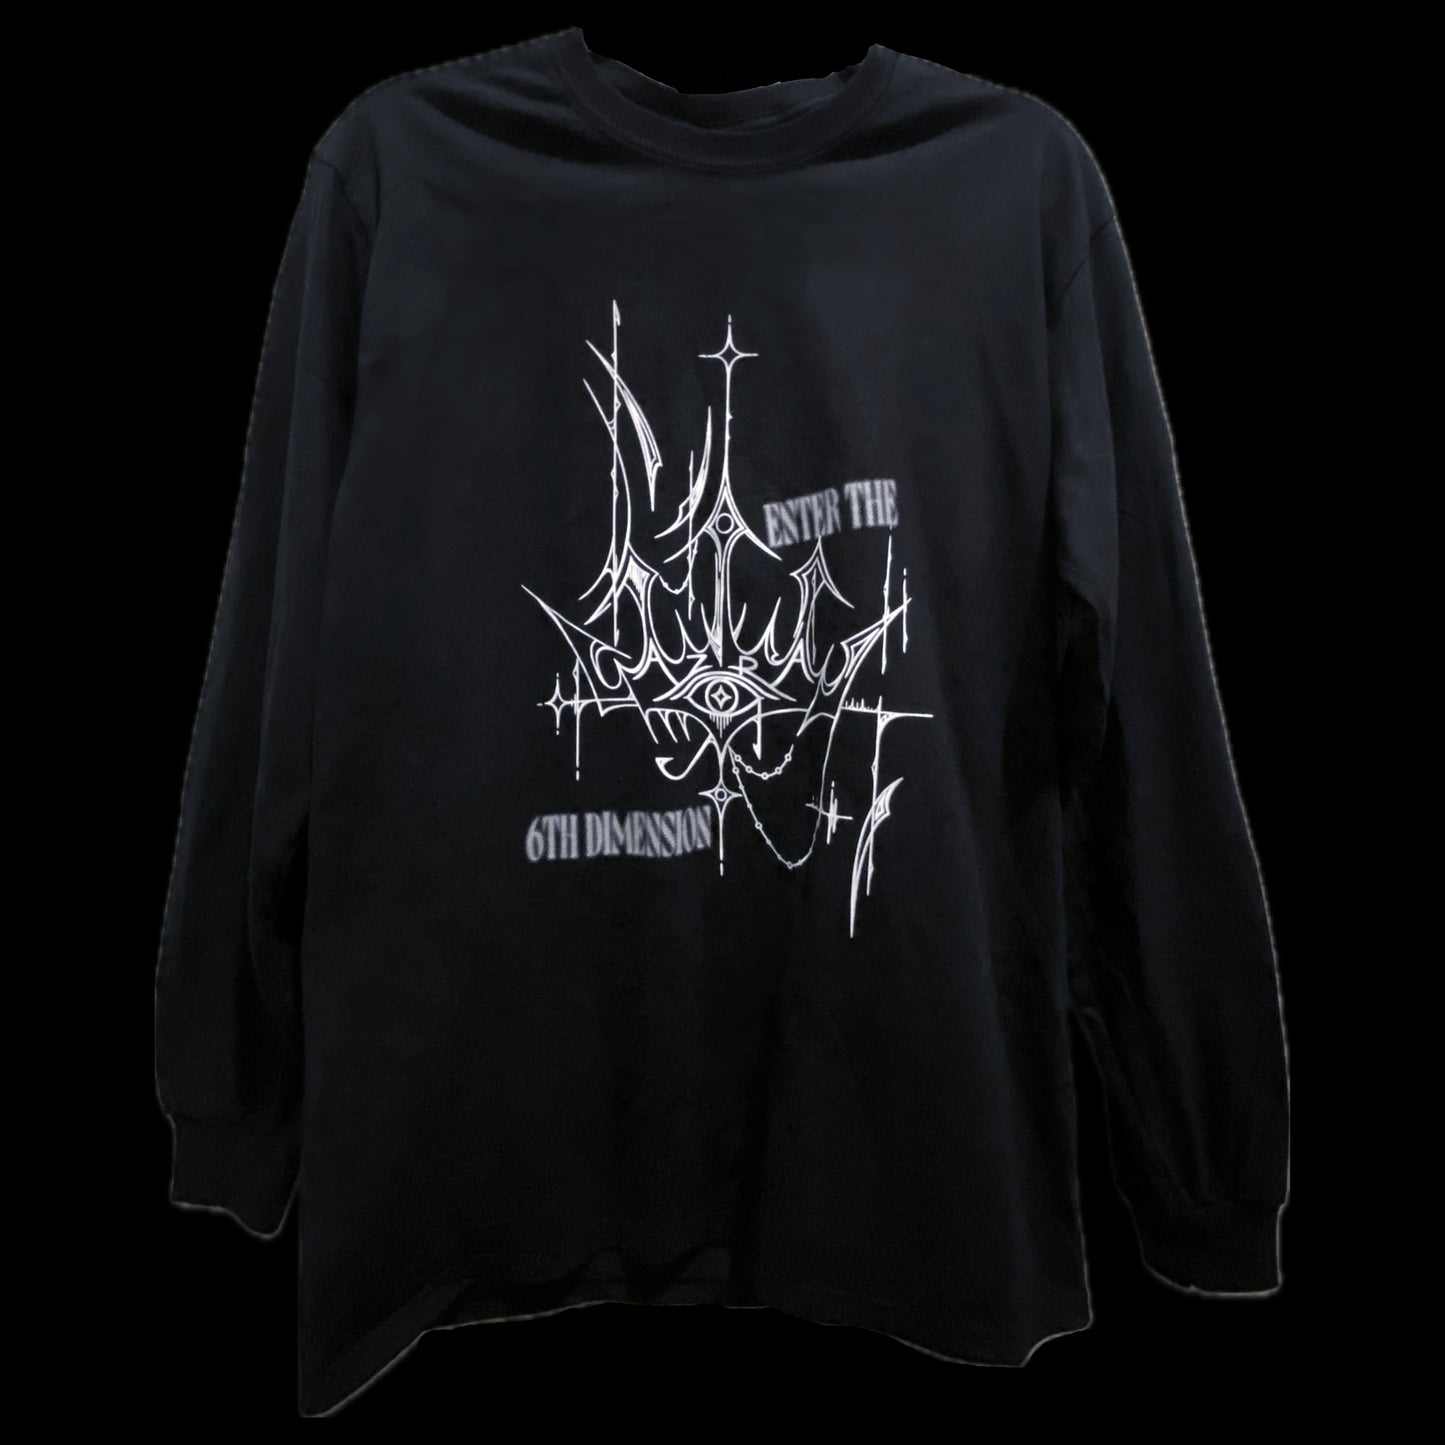 [ONLY 10 LEFT!] LIMITED: "6th Dimension" AZRA Merch Capsule Long Sleeve Unisex T-Shirt